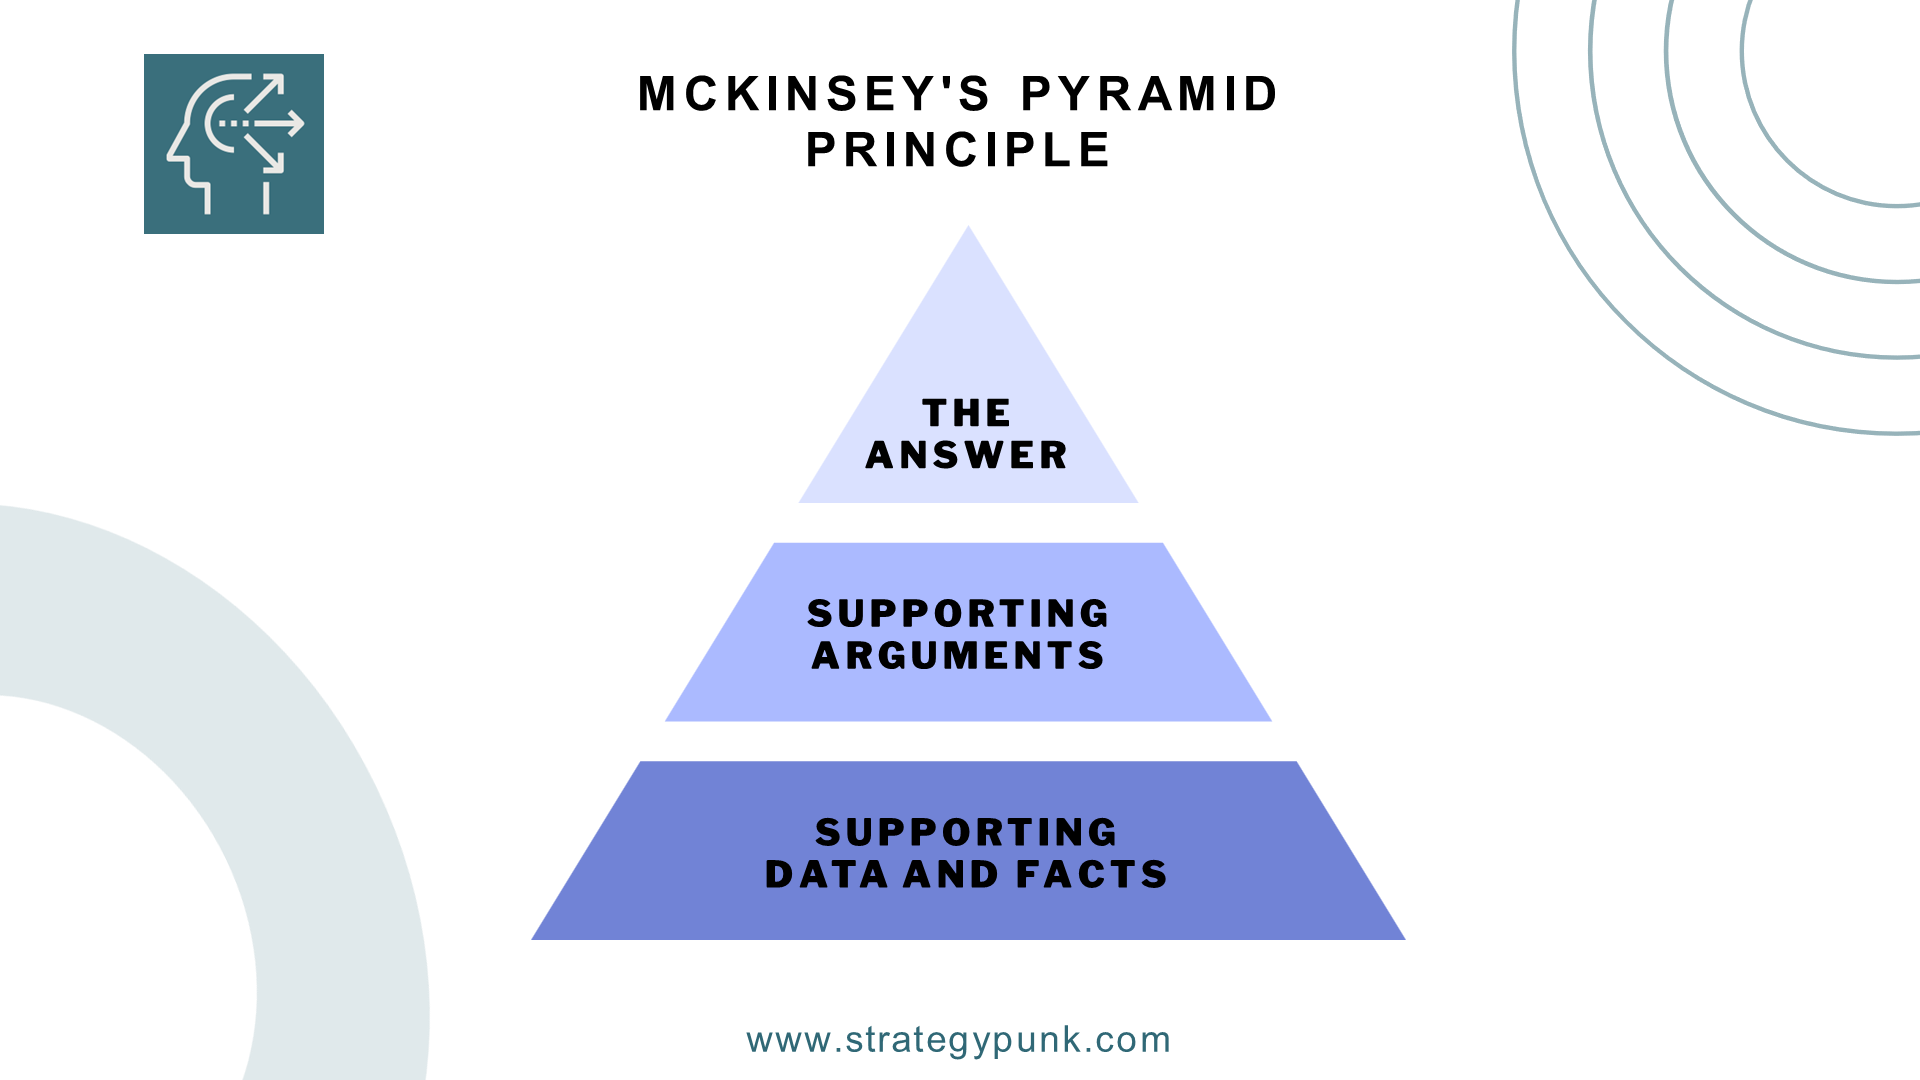 McKinsey Pyramid Principle: The Ultimate Guide to Effective Arguments